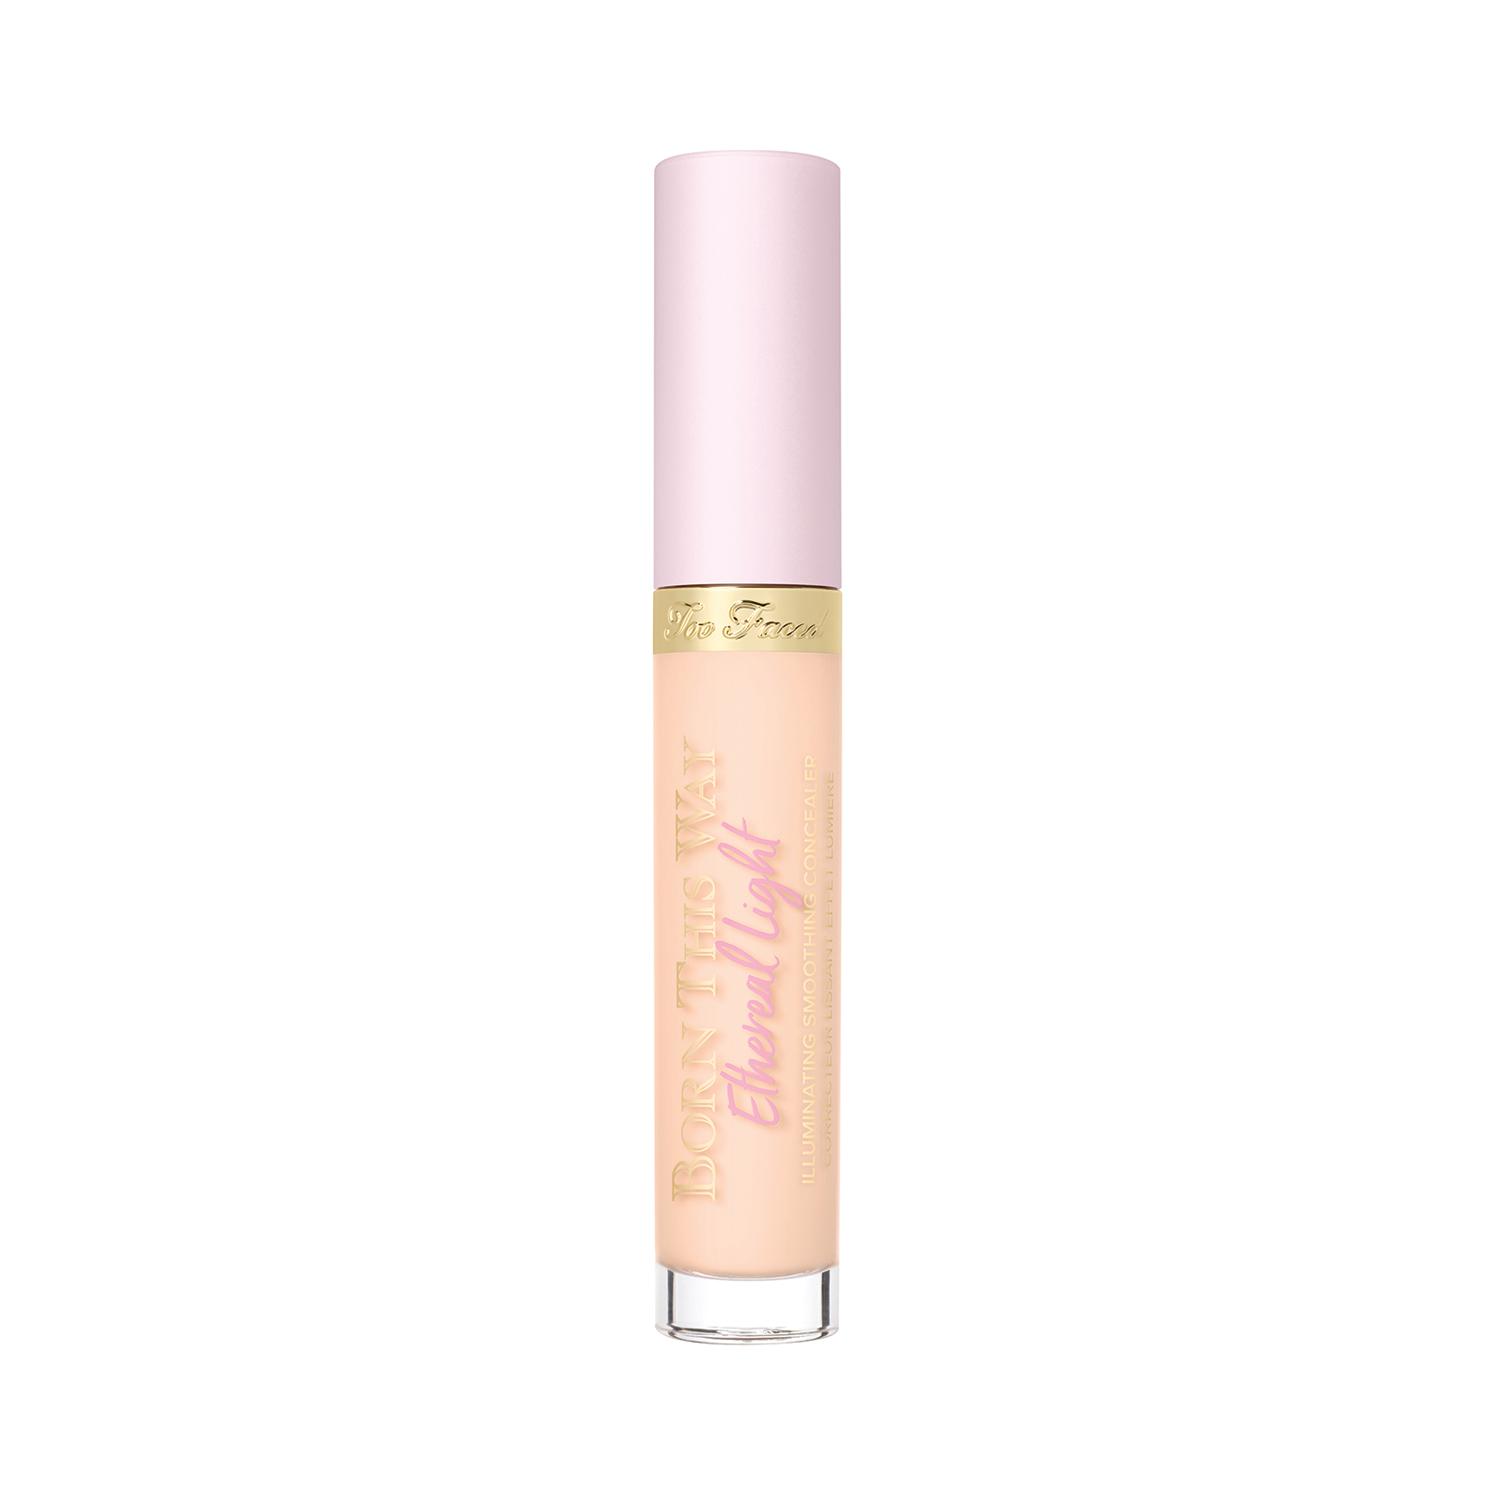 Too Faced | Too Faced Born This Way Illuminating Concealer - Buttercup (5ml)